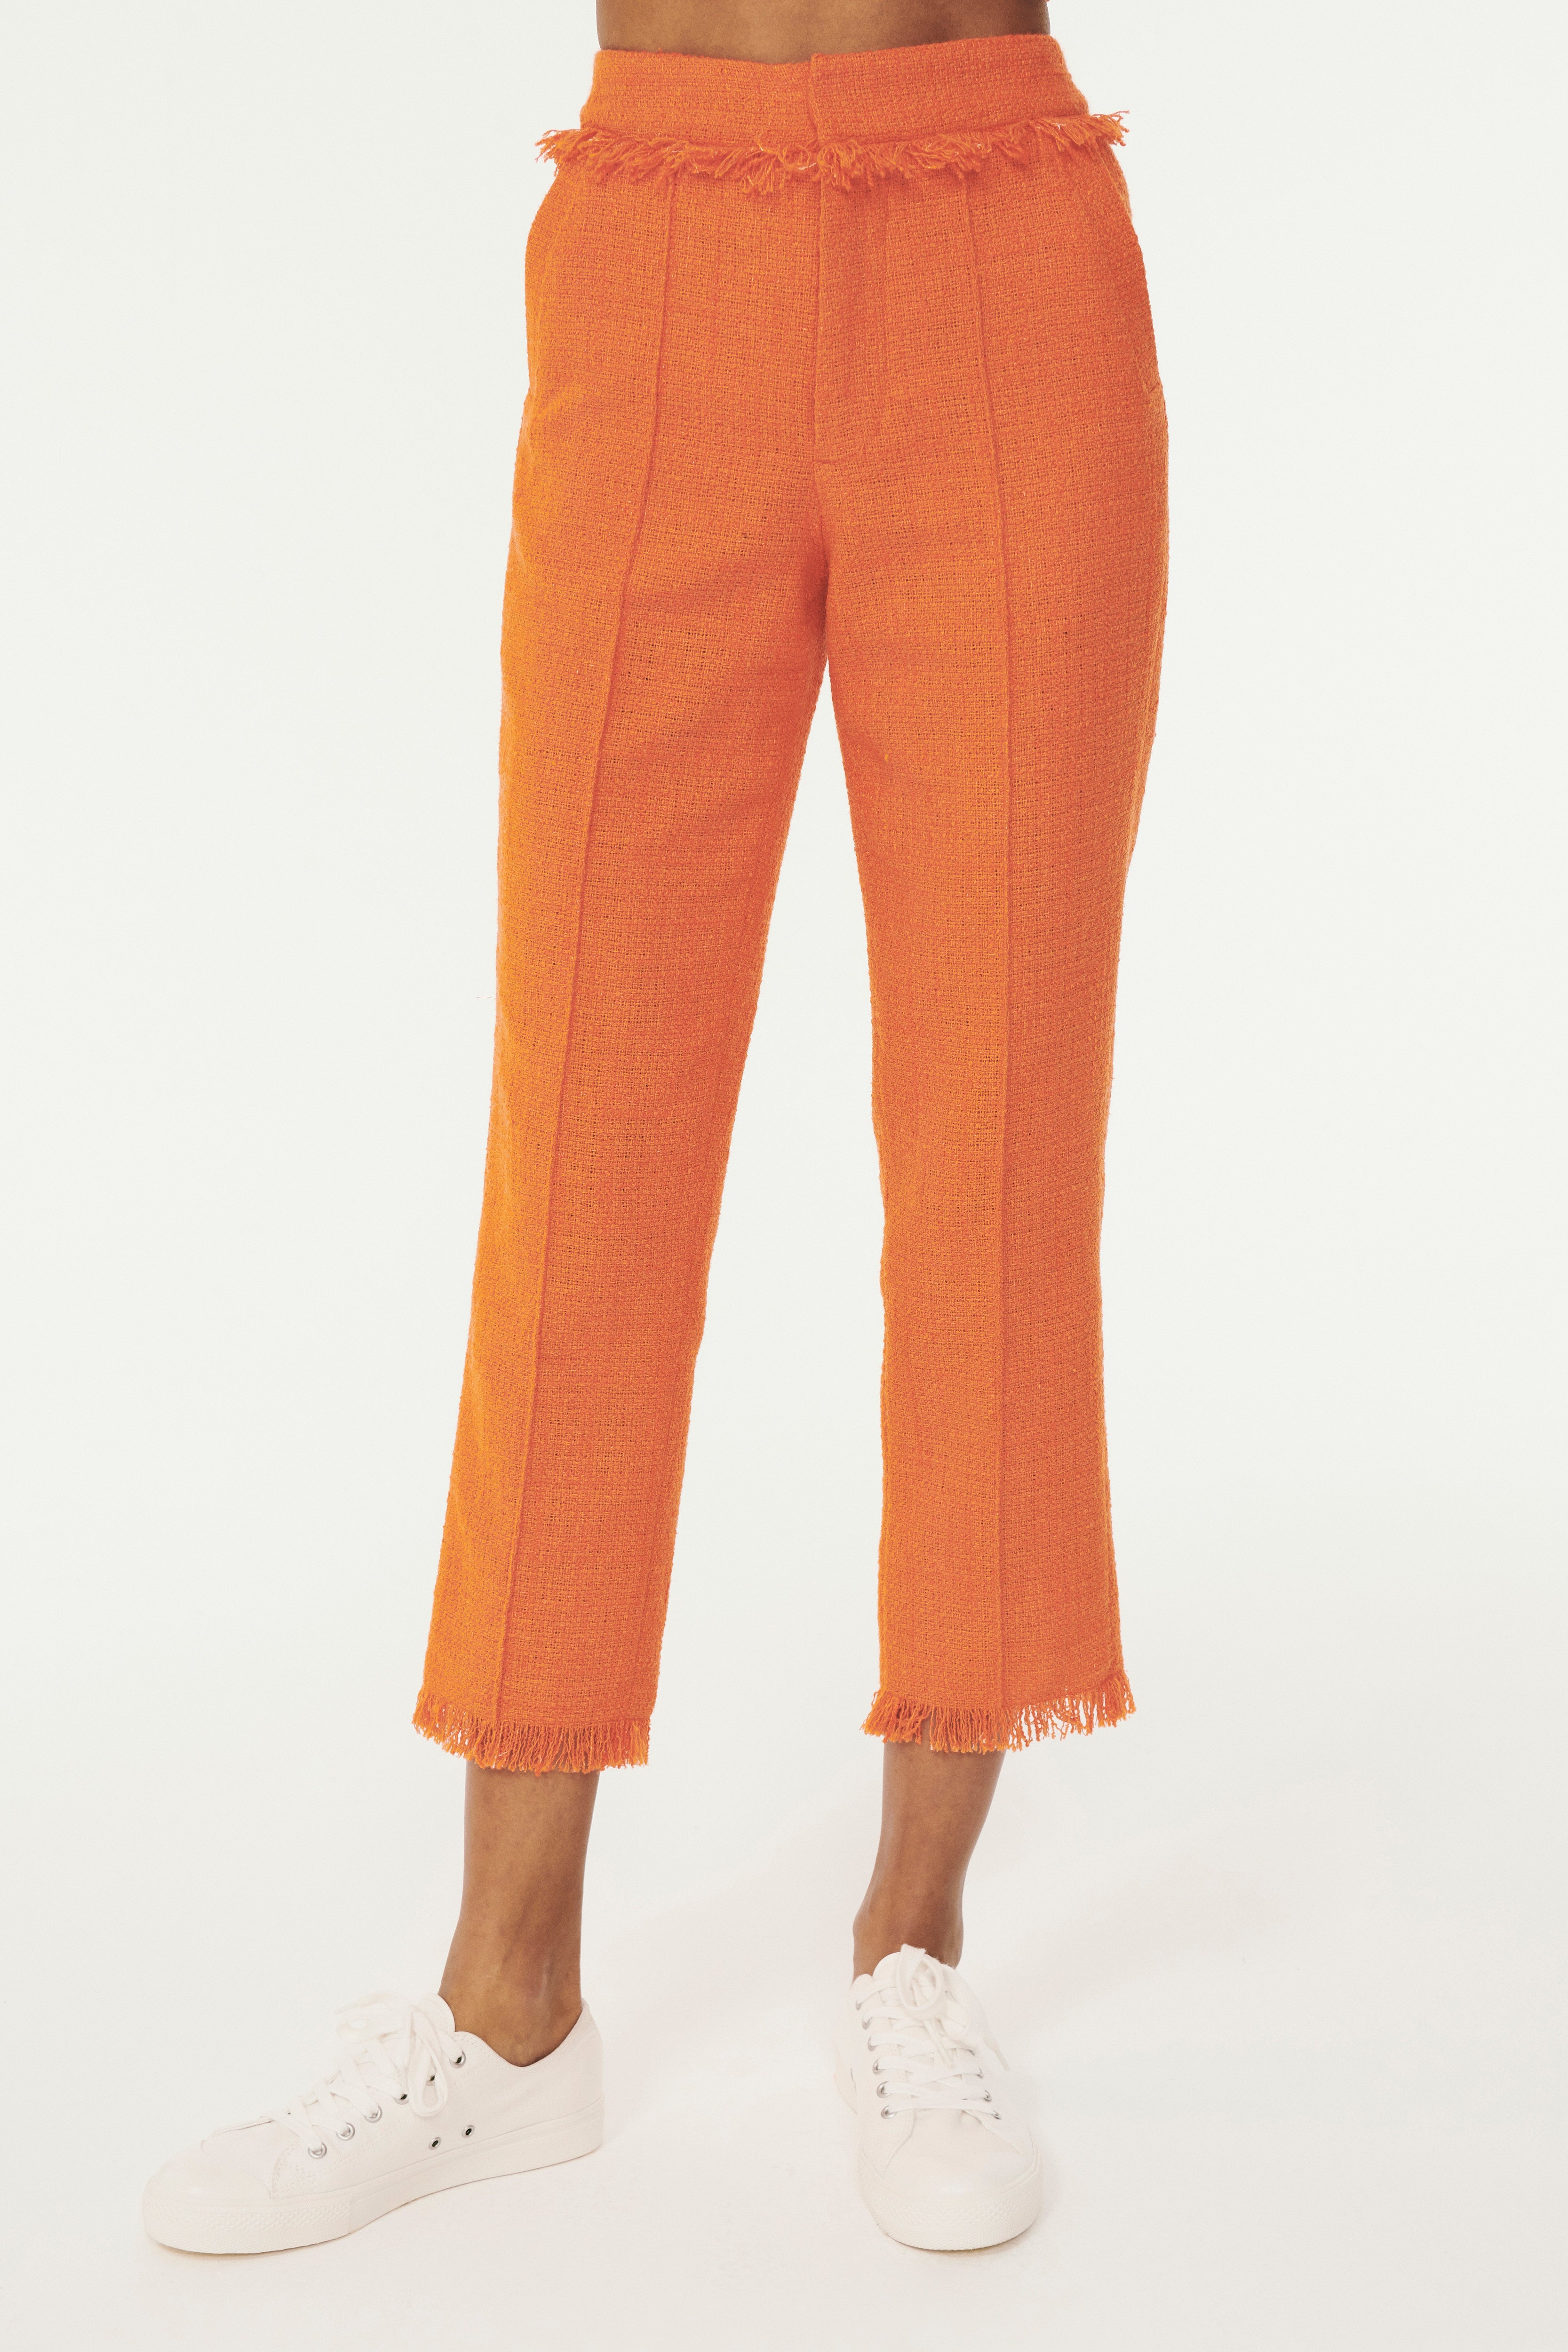 CLOSED Corduroy trousers PEDAL PUSHER in cognac